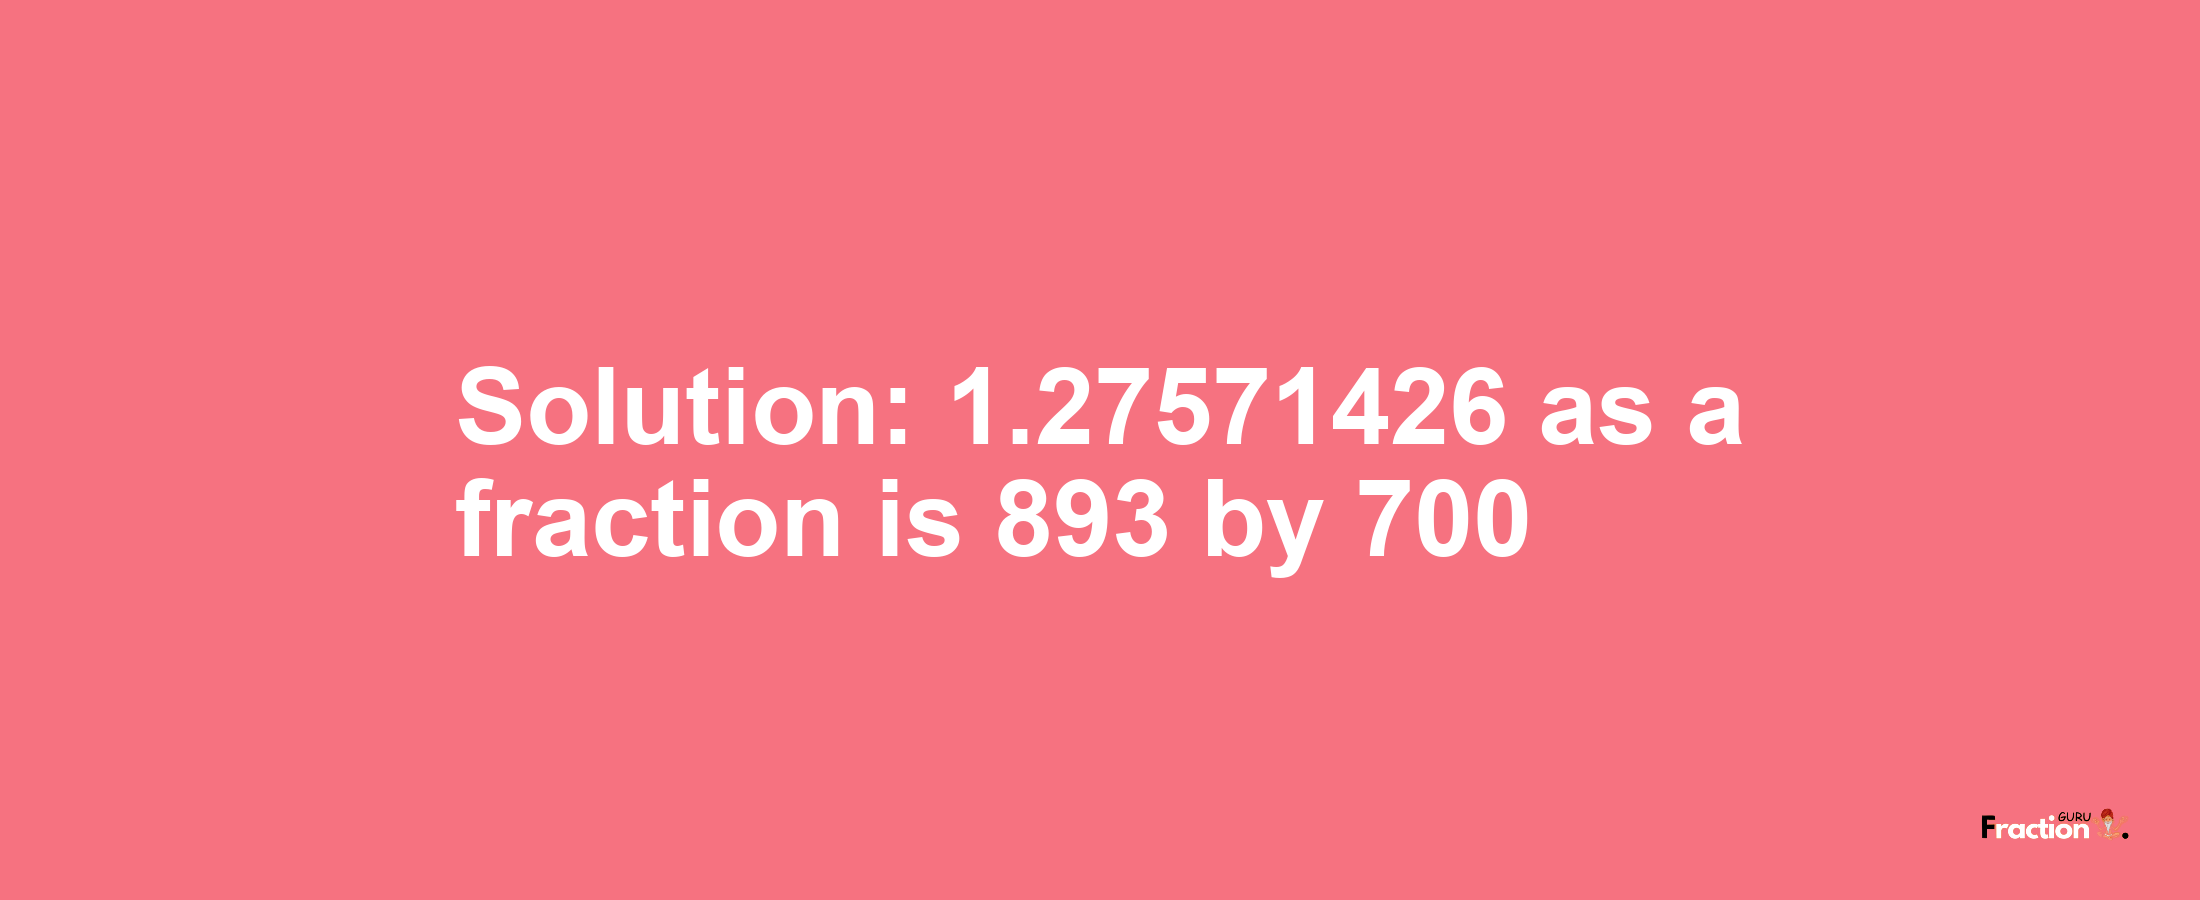 Solution:1.27571426 as a fraction is 893/700